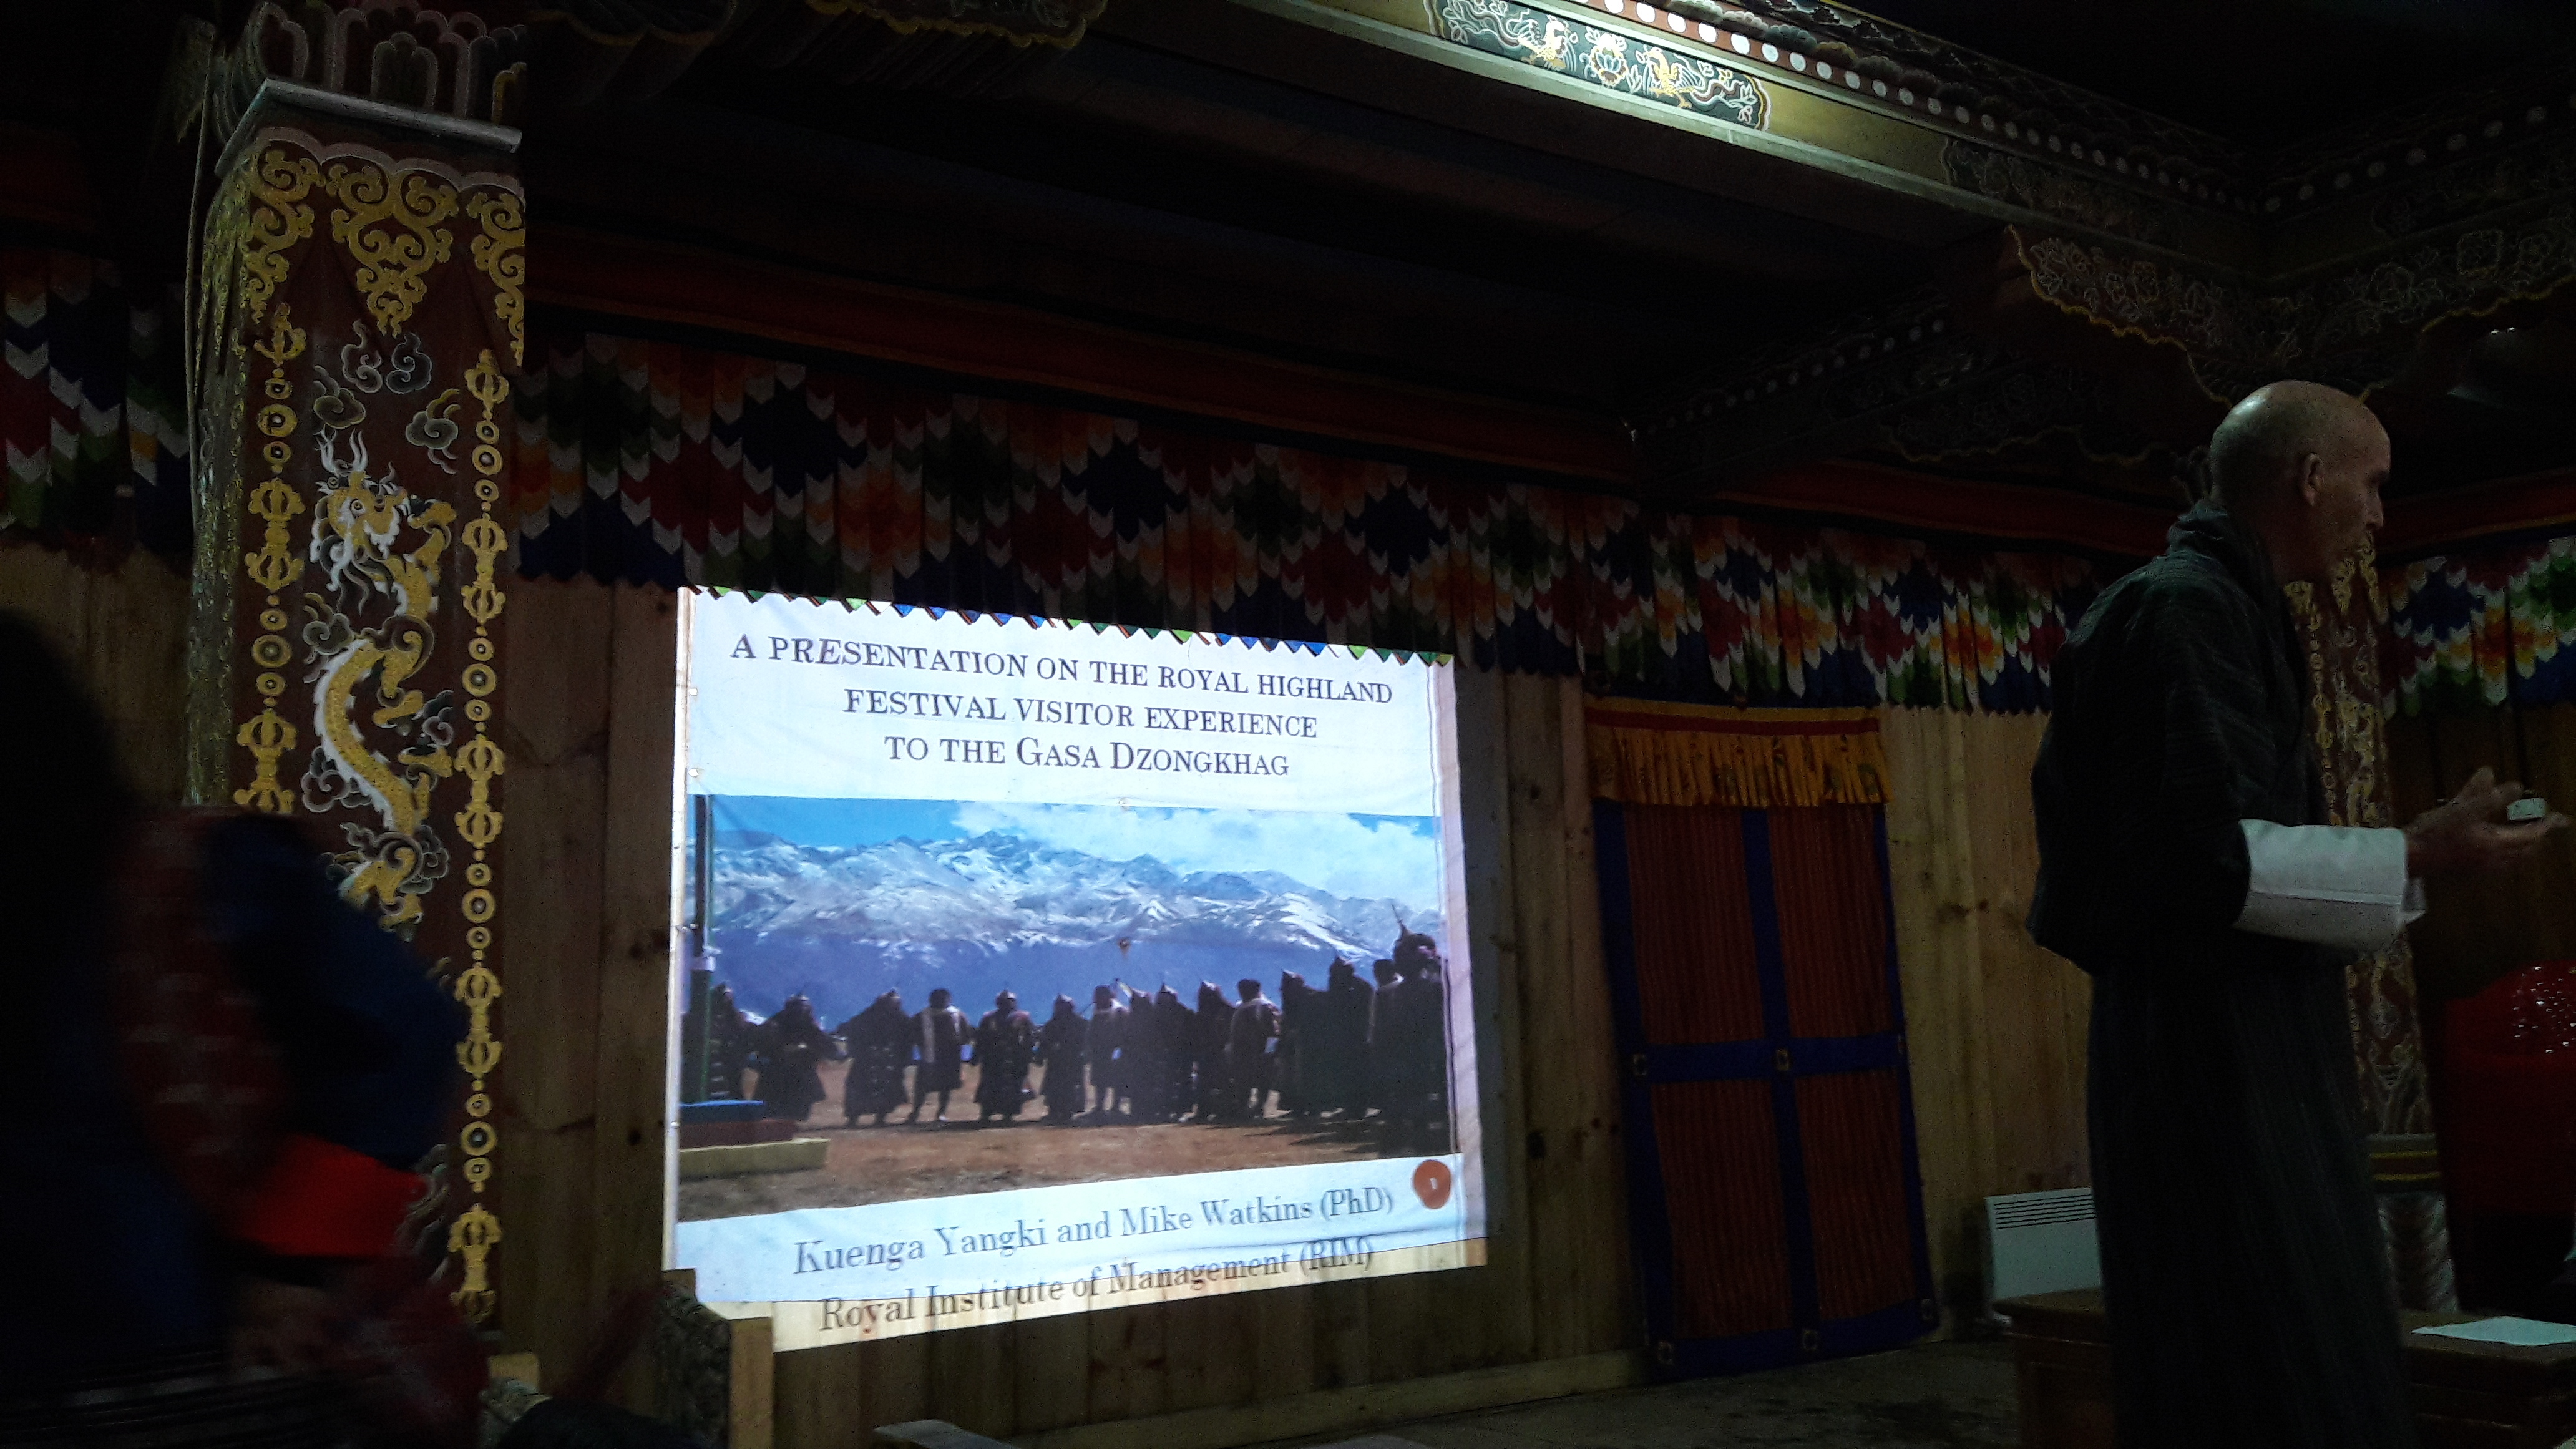 Dr. Mike Watkins and Mrs. Kuenga Yangki from the Royal Institute of Management presented their findings on visitor experience study of Royal Highland Festival 2018 to organizing committee here in the Dzongkhag.